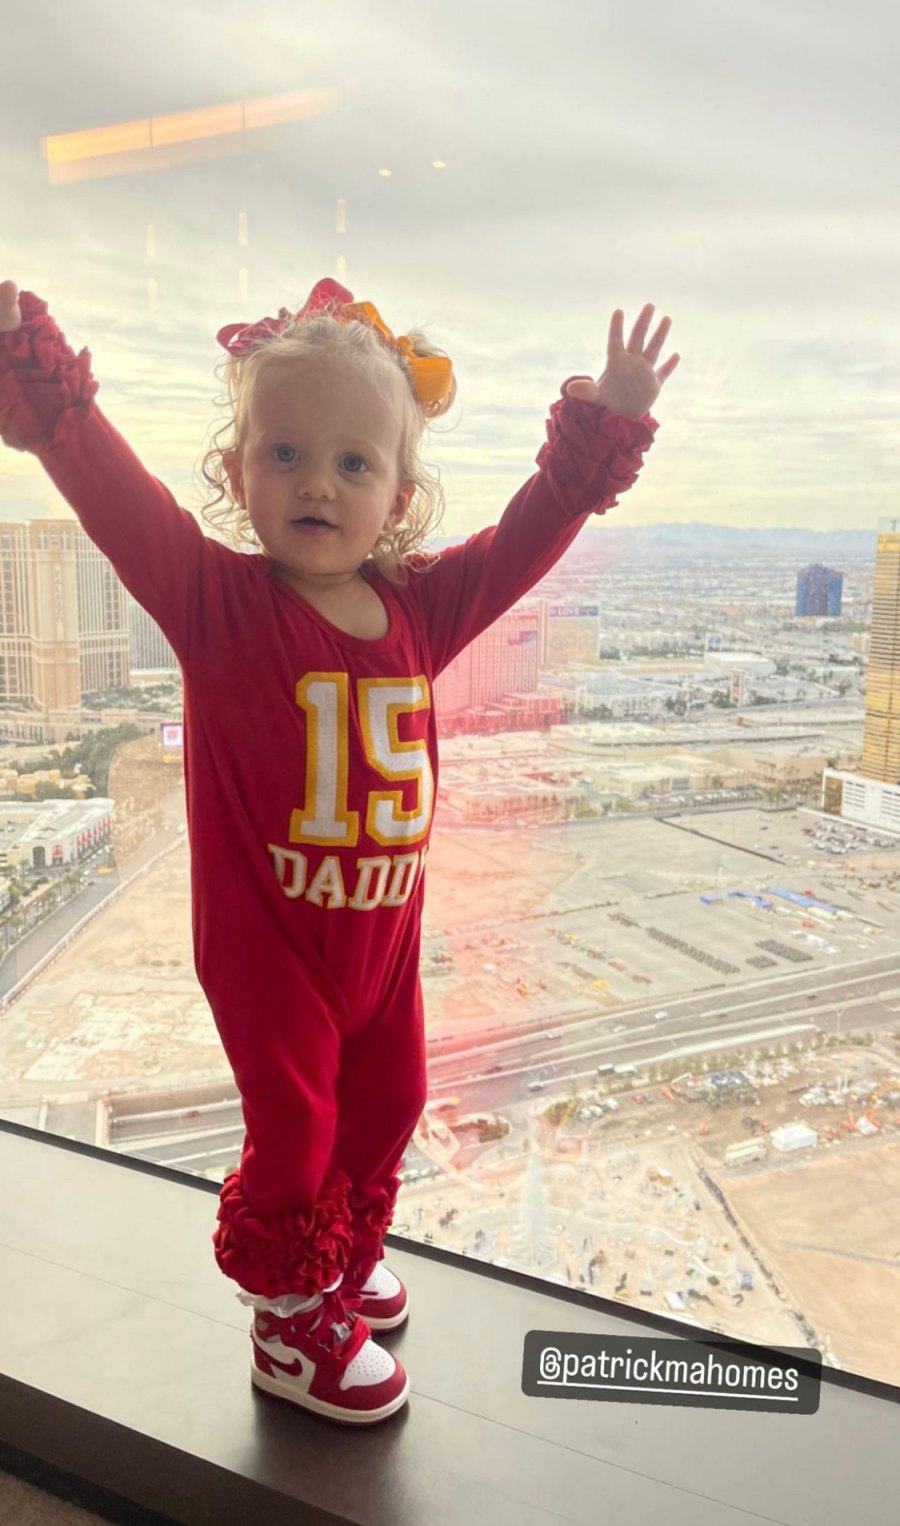 Patrick Mahomes Daughter Sterling Supports Kansas City Chiefs in 'Daddy' Jersey